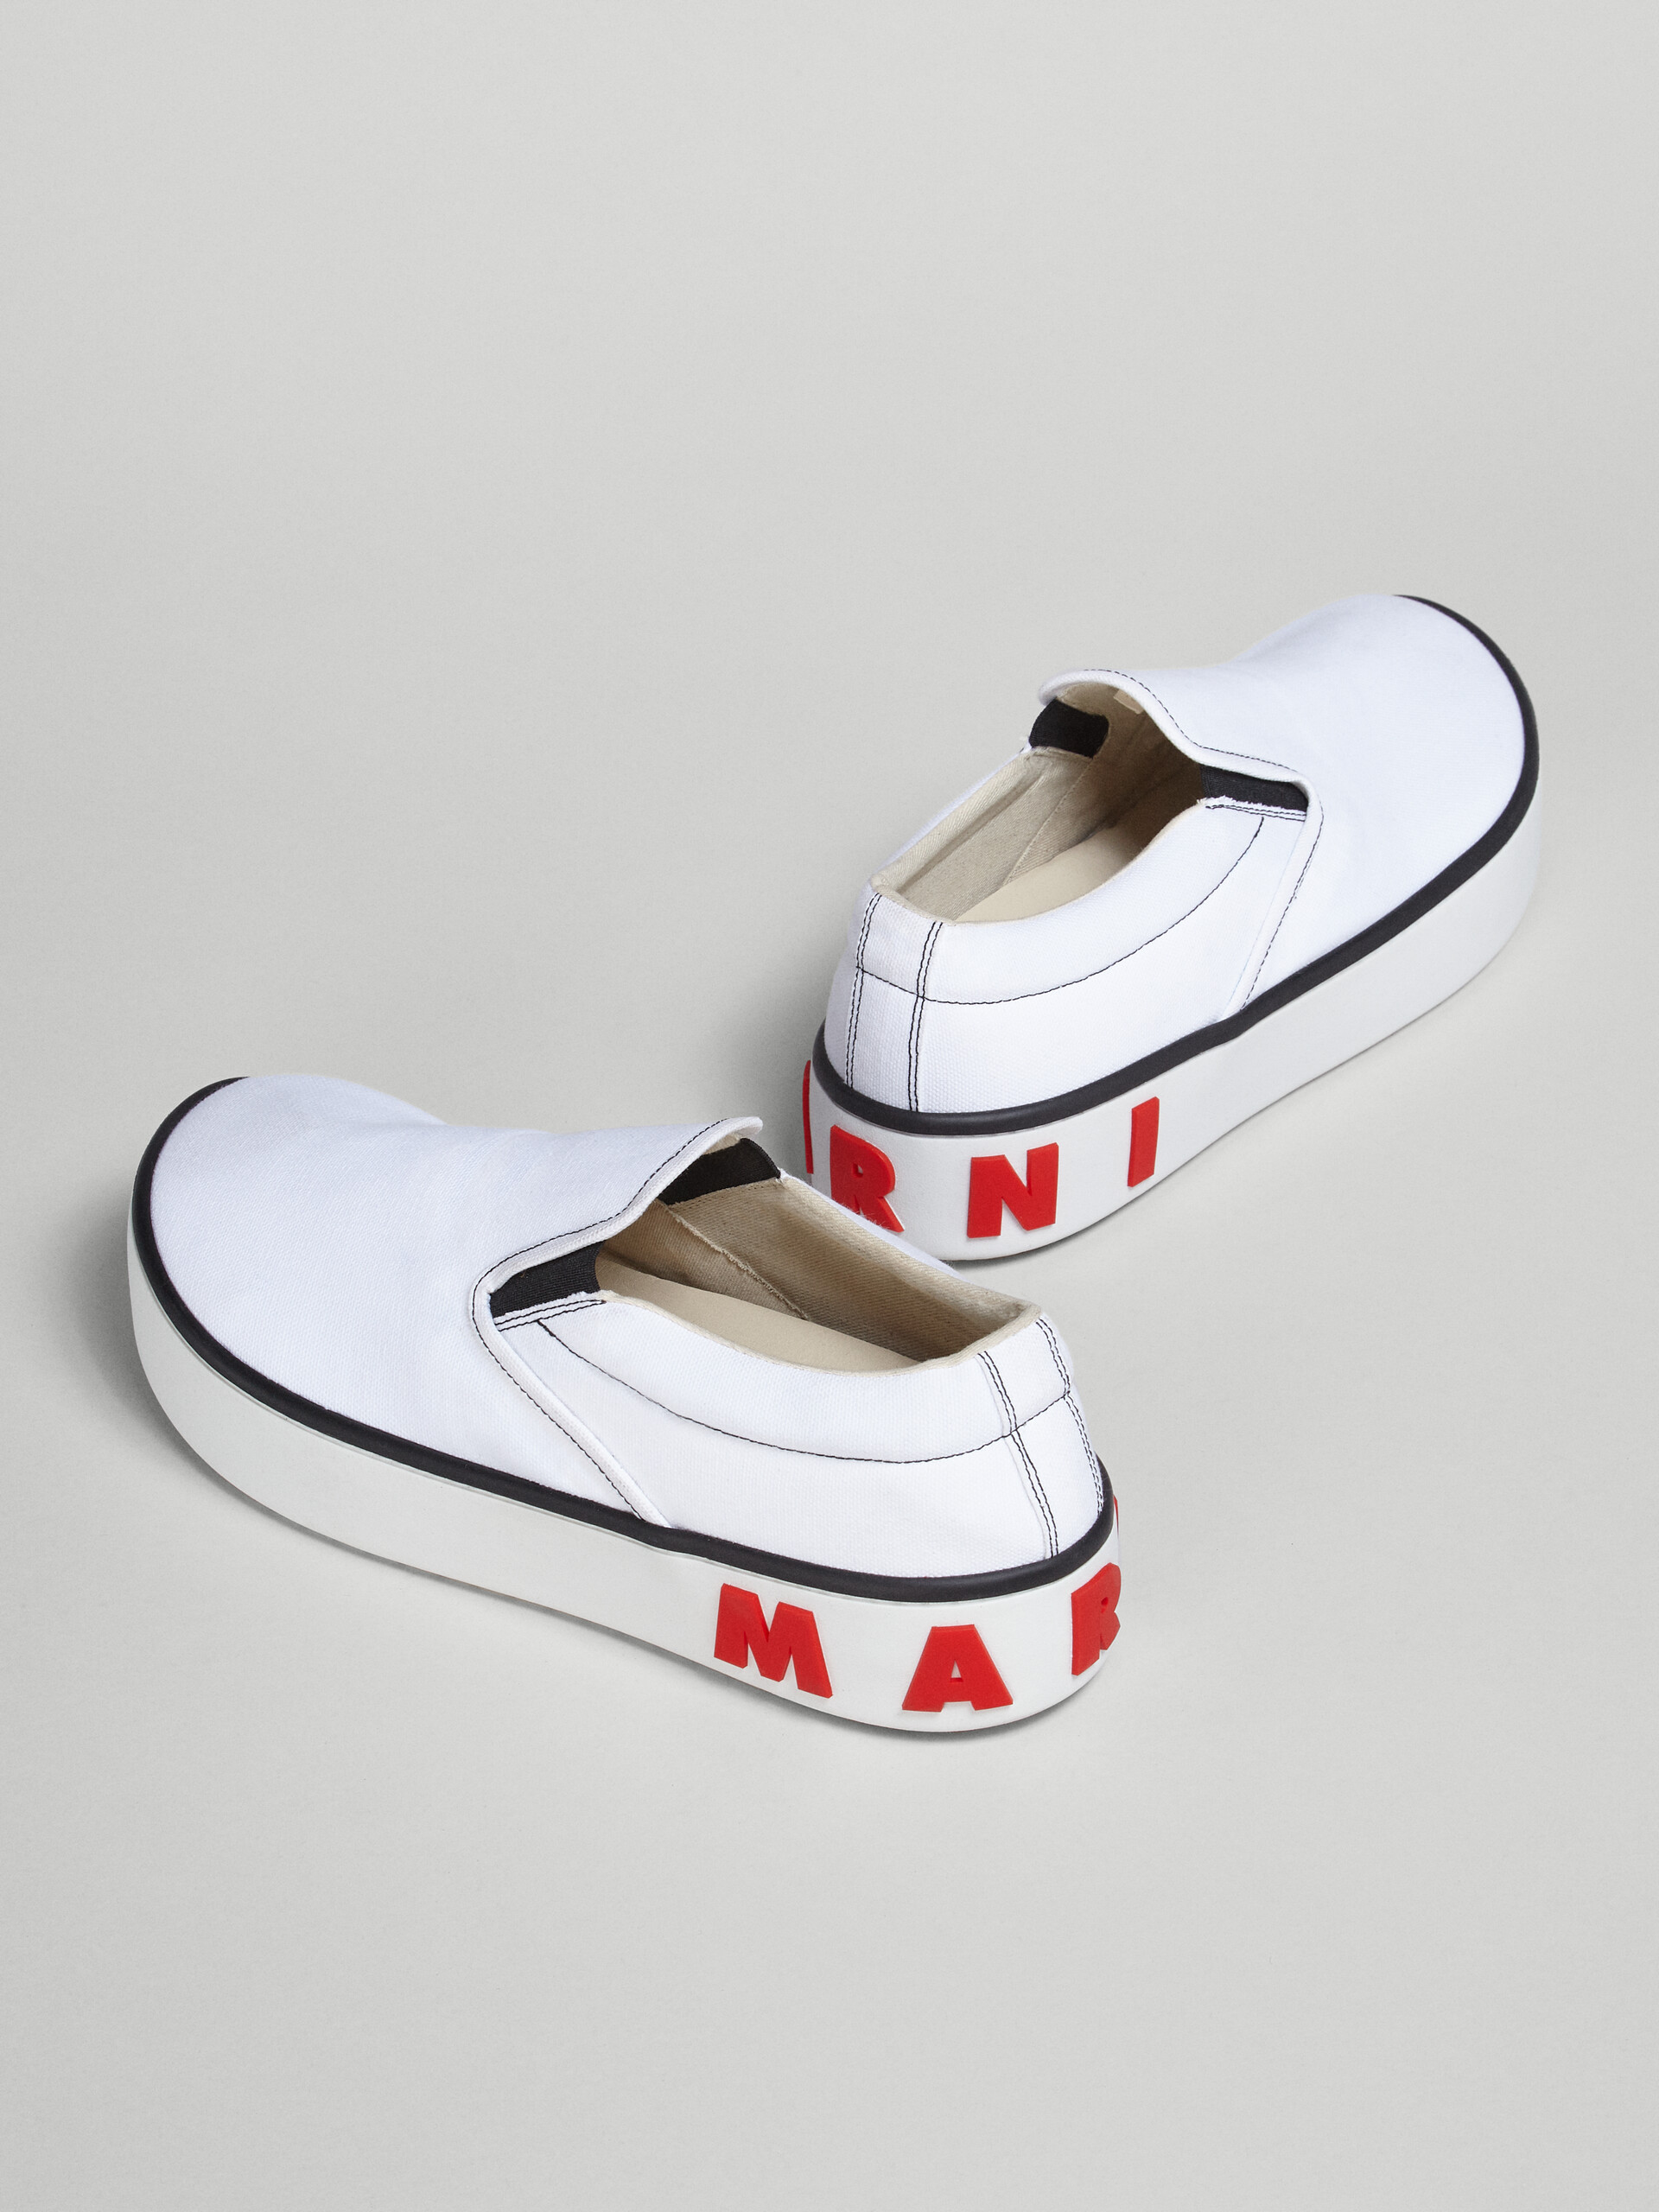 Canvas slip-on PAW sneaker with back maxi logo - Sneakers - Image 5